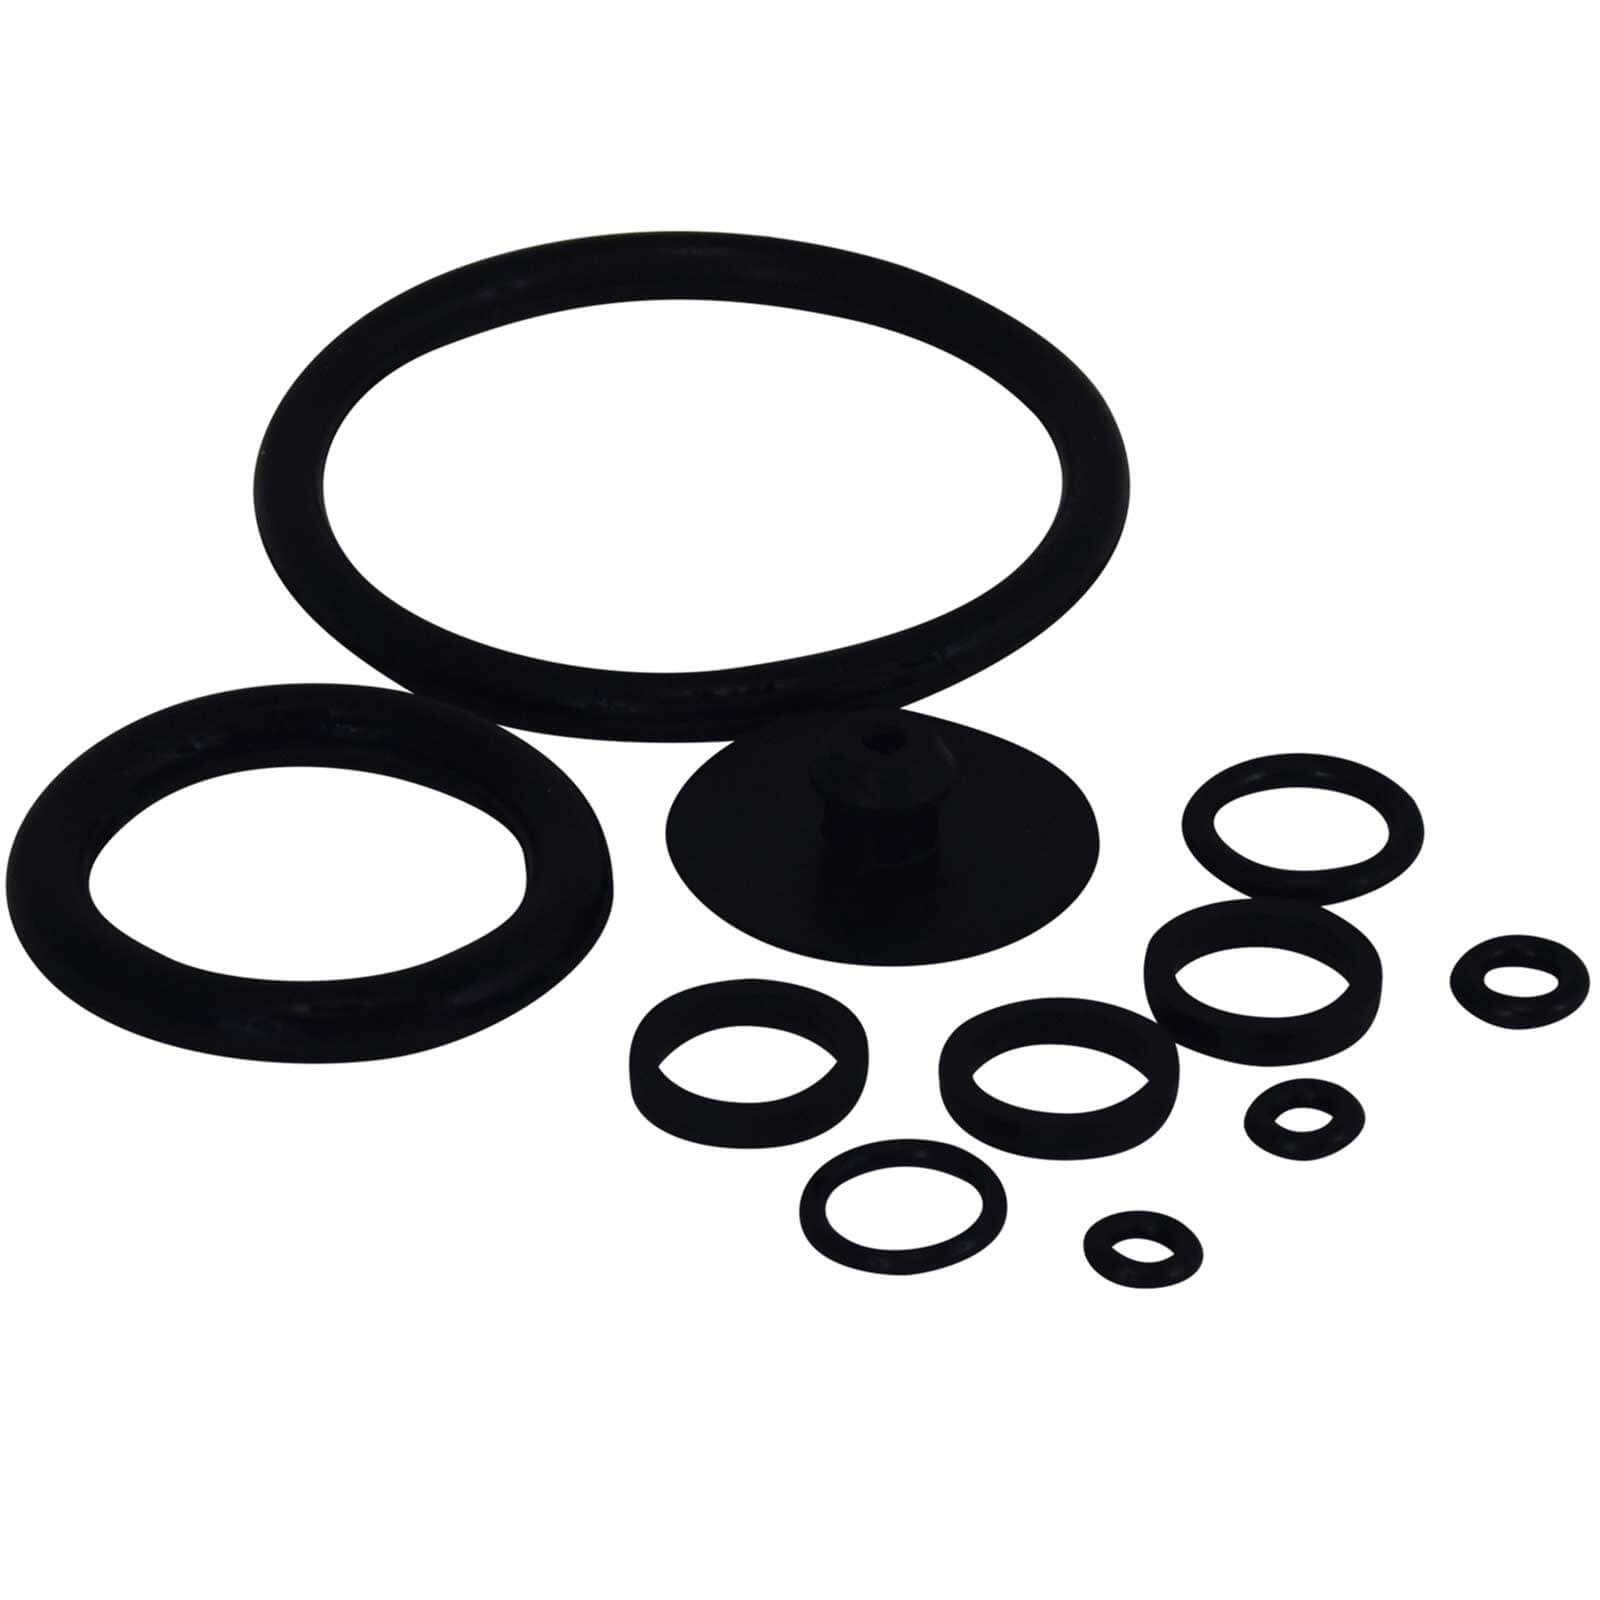 Spear and Jackson Replacement O Rings for 5l and 8l Pressure Sprayers